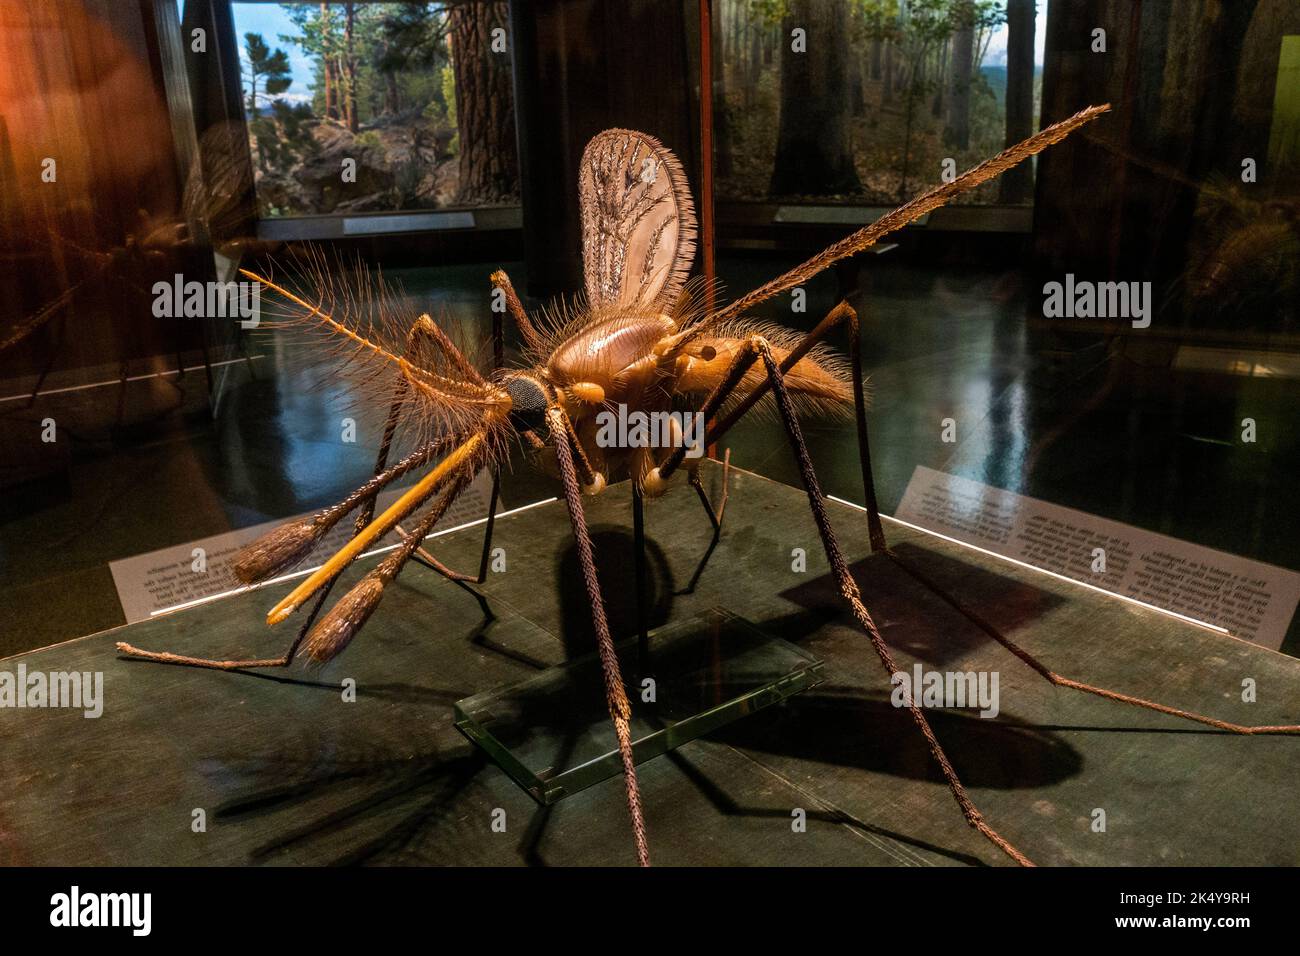 American Museum of natural history in Manhattan NYC Stock Photo